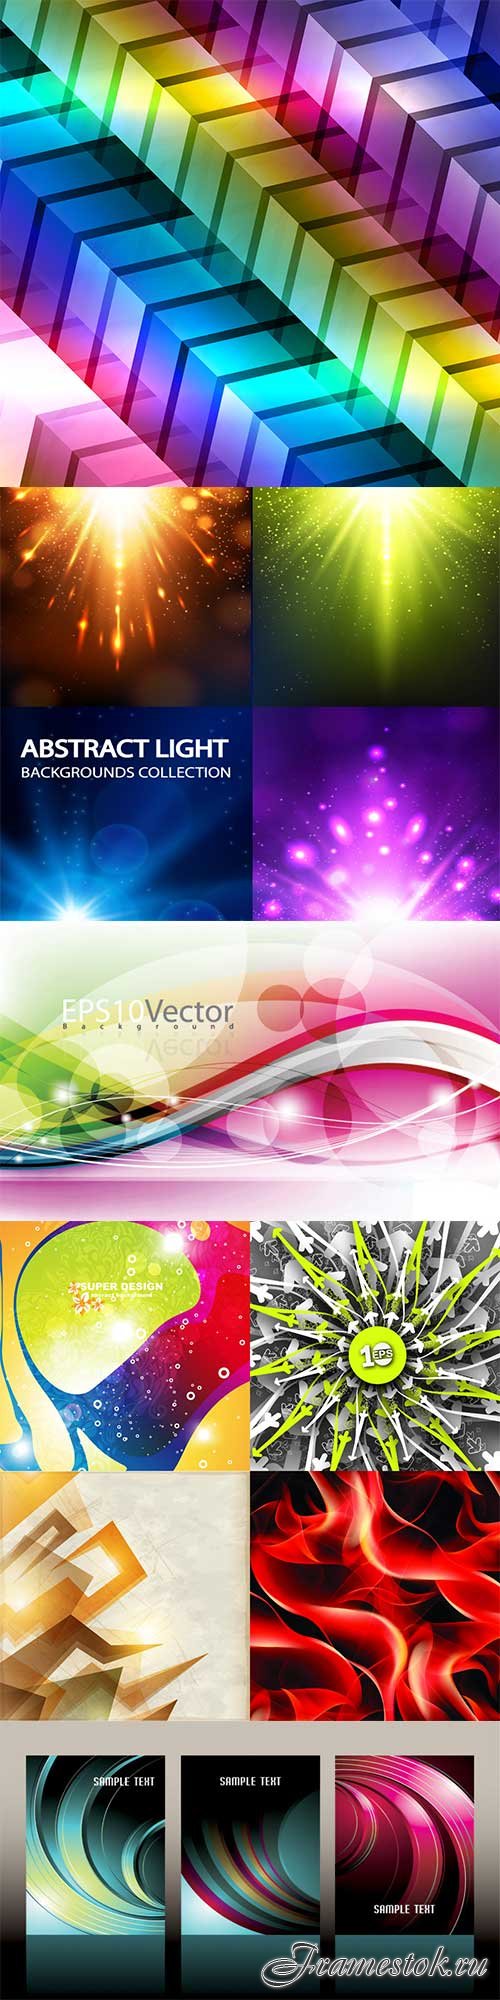 Bright colorful abstract backgrounds vector - 62